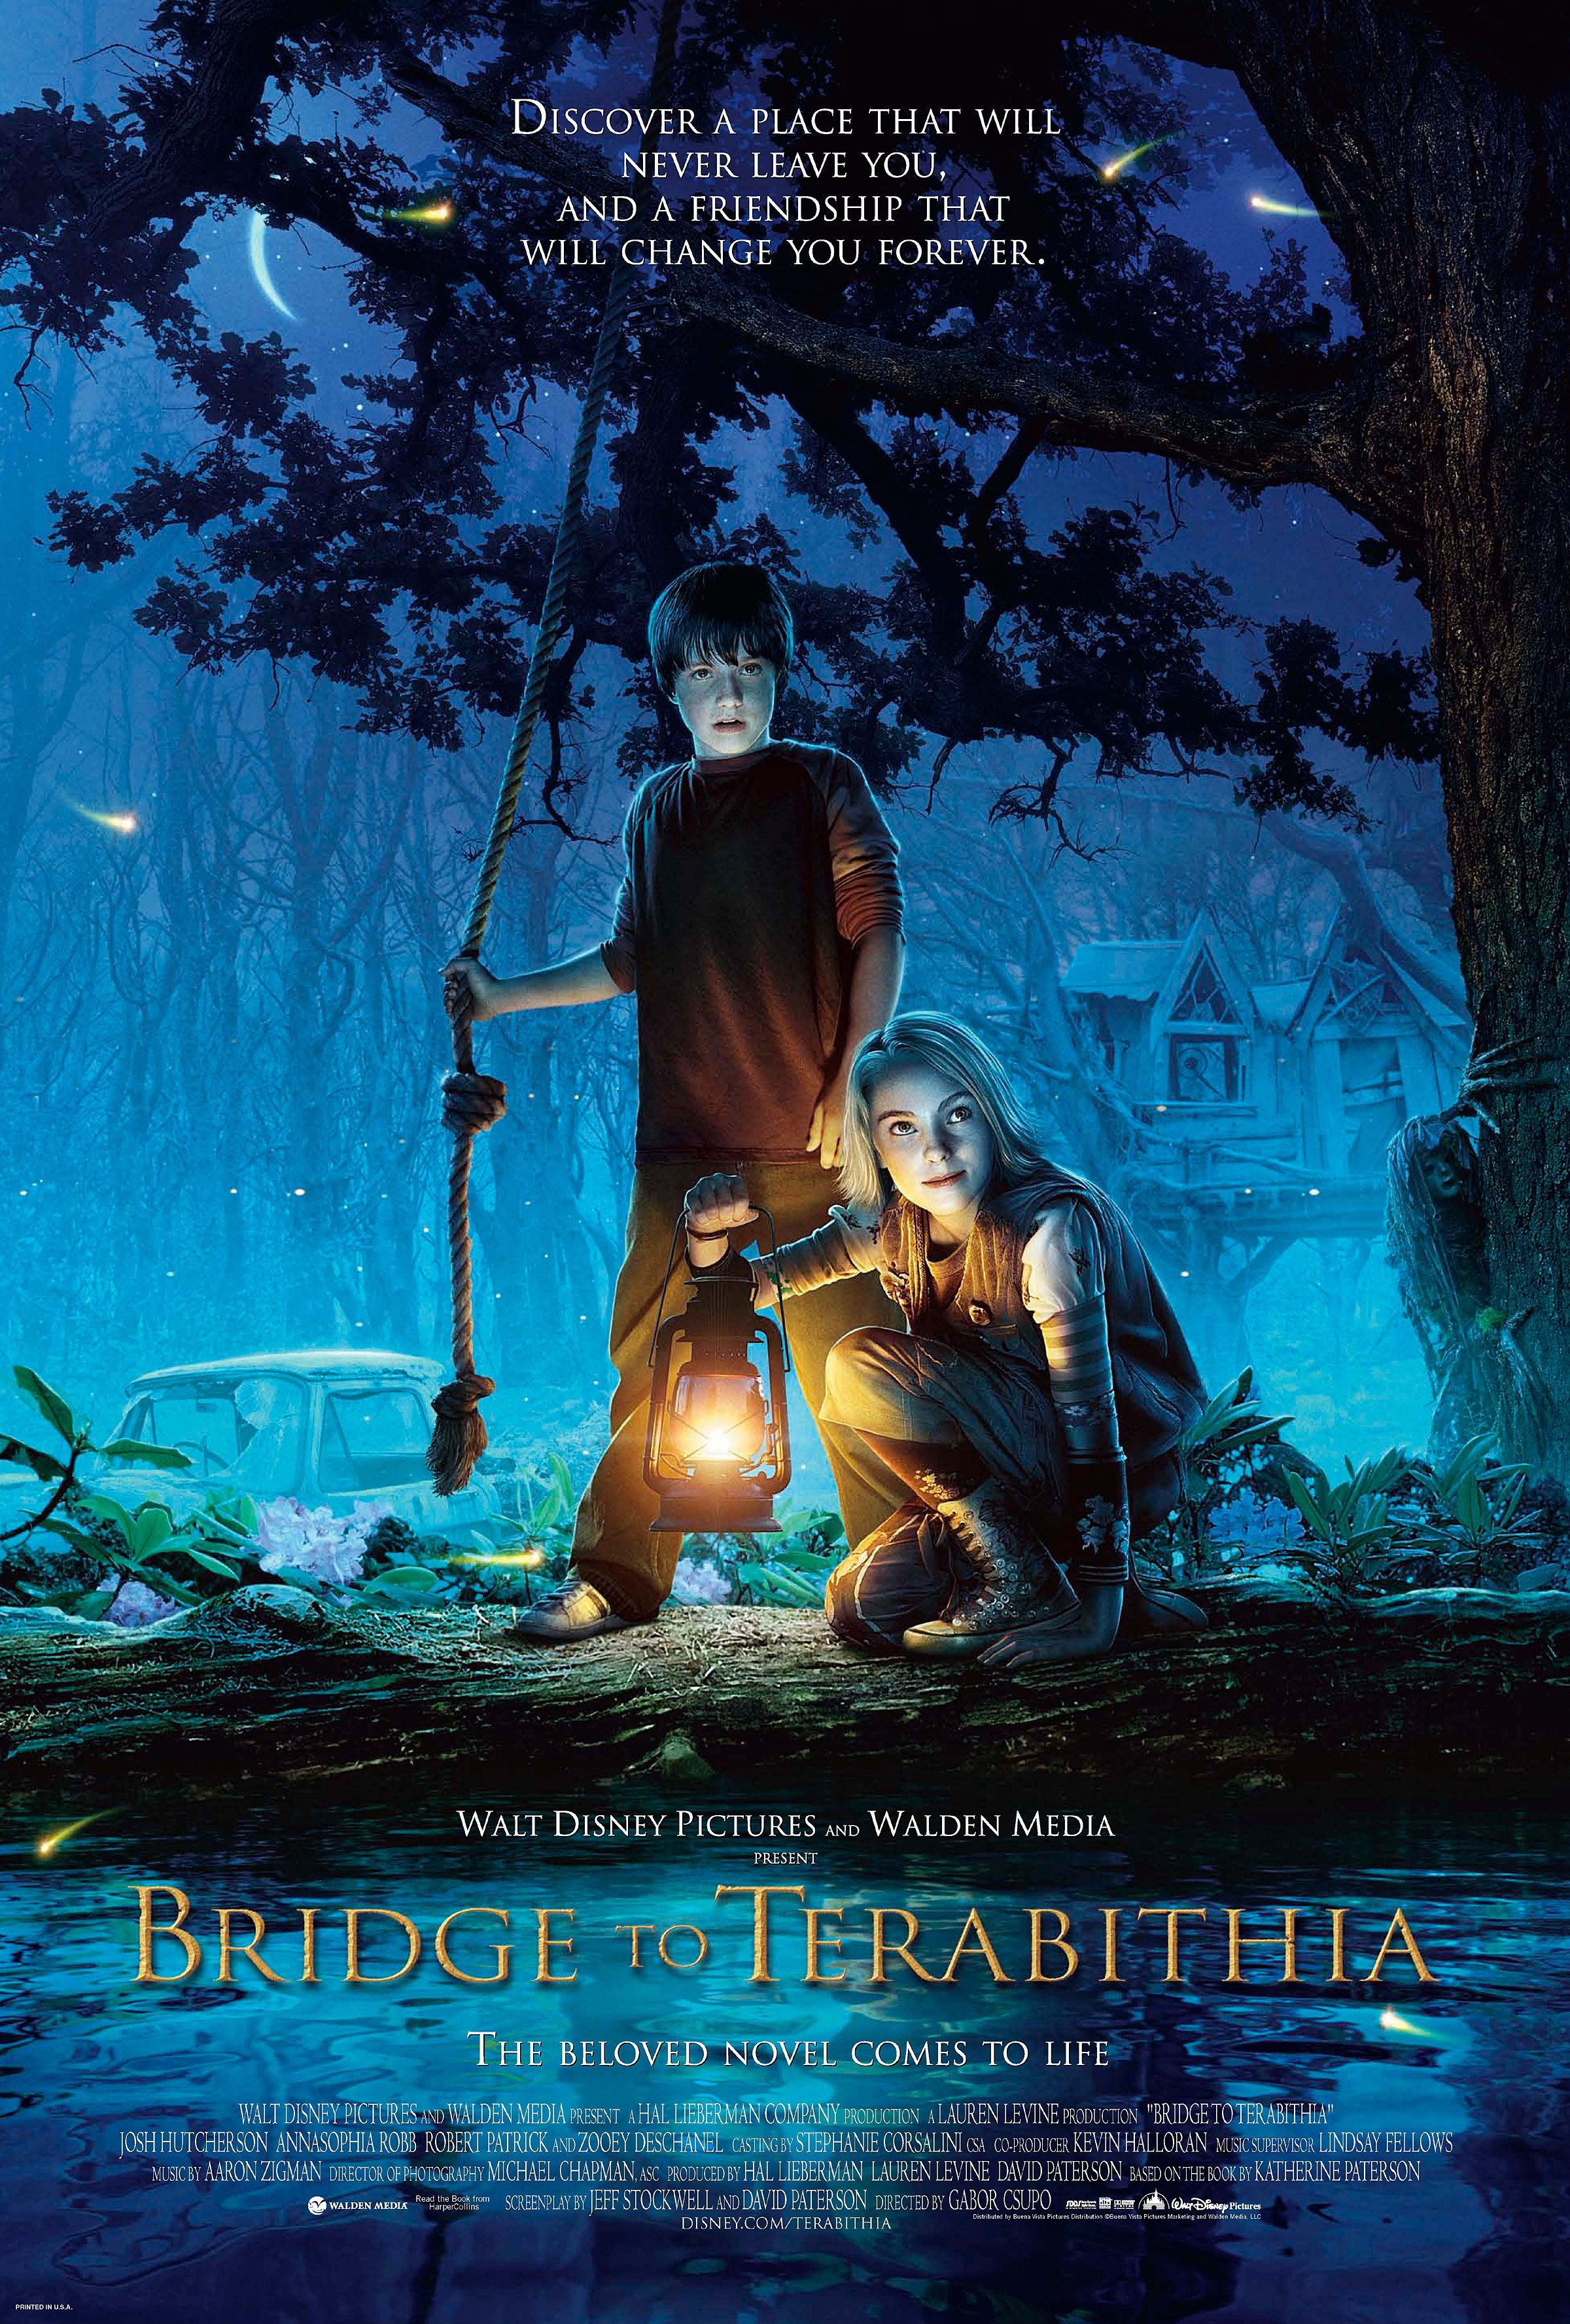 Jess and Leslie pose next to each other on the Bridge to Terabithia Film Poster